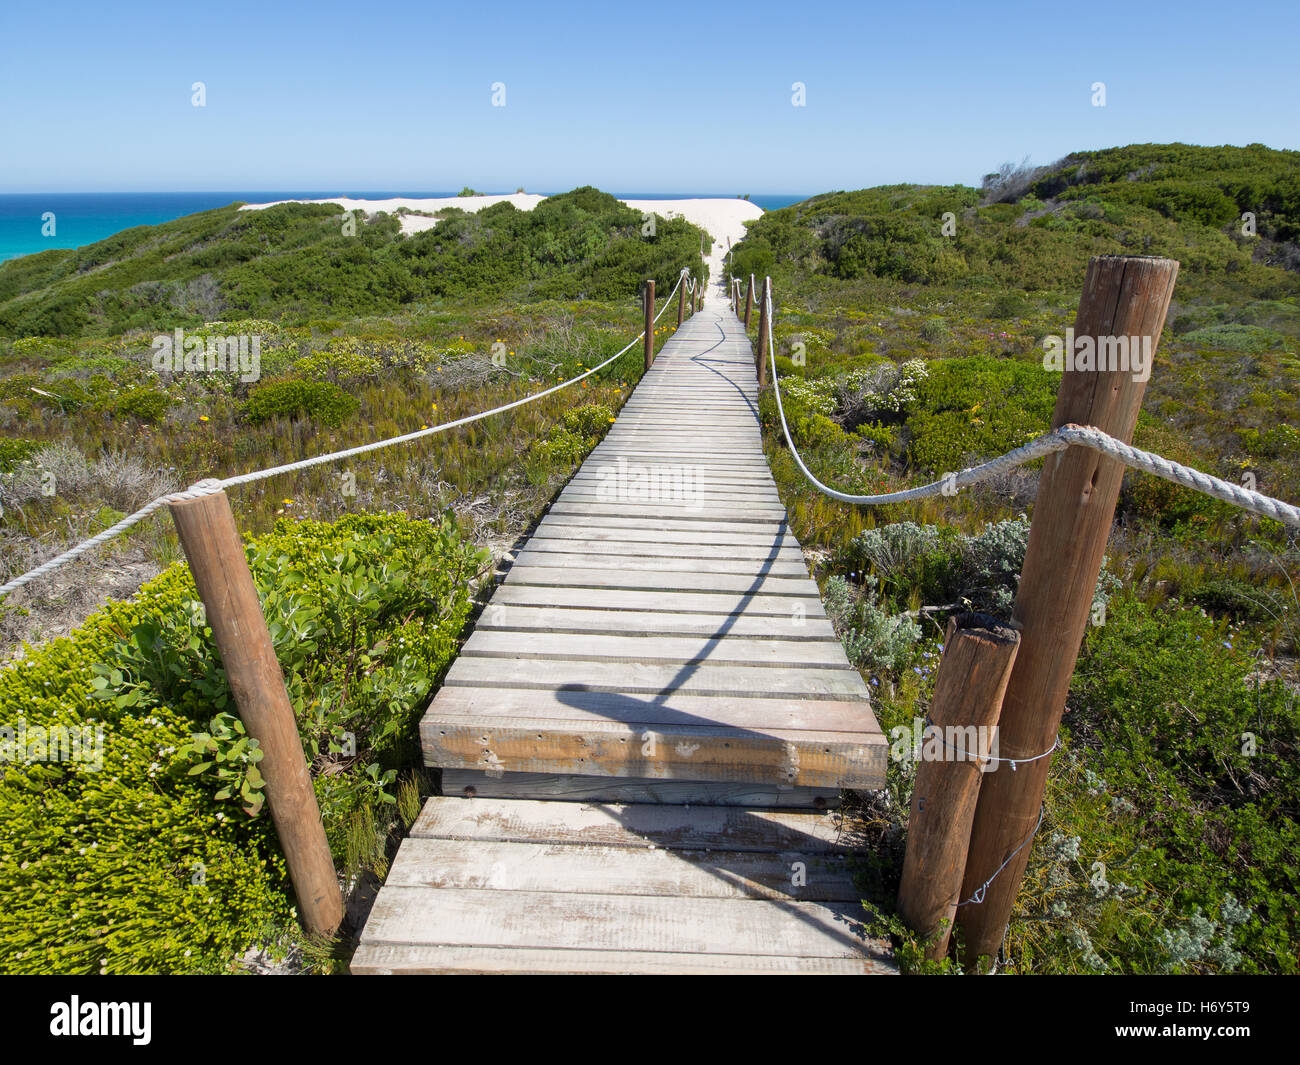 Wooden walkway through green dunes to a turquoise ocean. Taken at De Hoop Nature Reserve in South Africa. Stock Photo